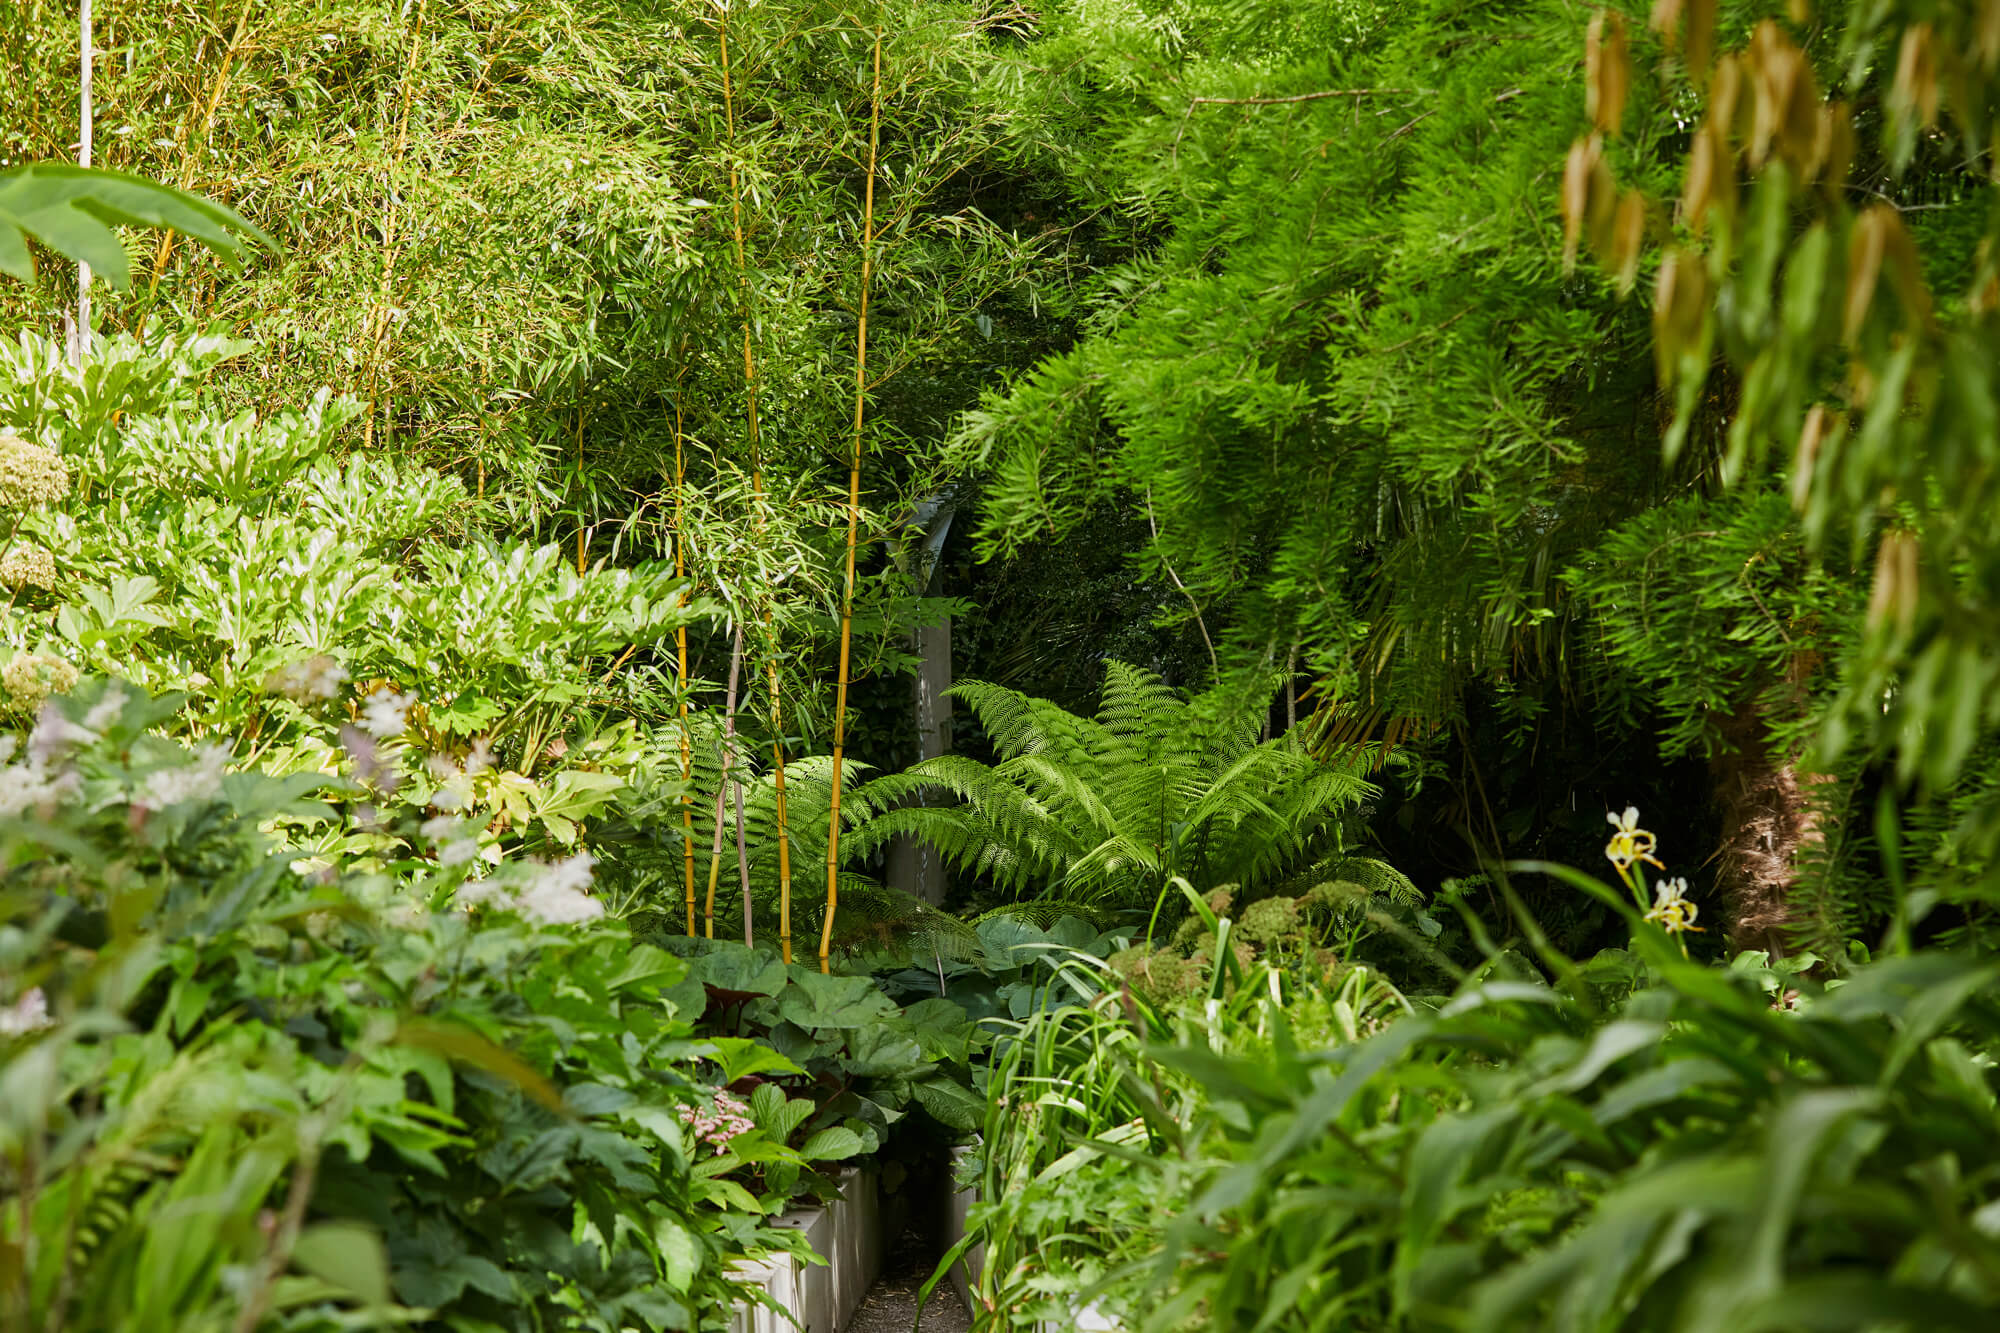 Sub-tropical plants in the Round Dell at Borde Hill